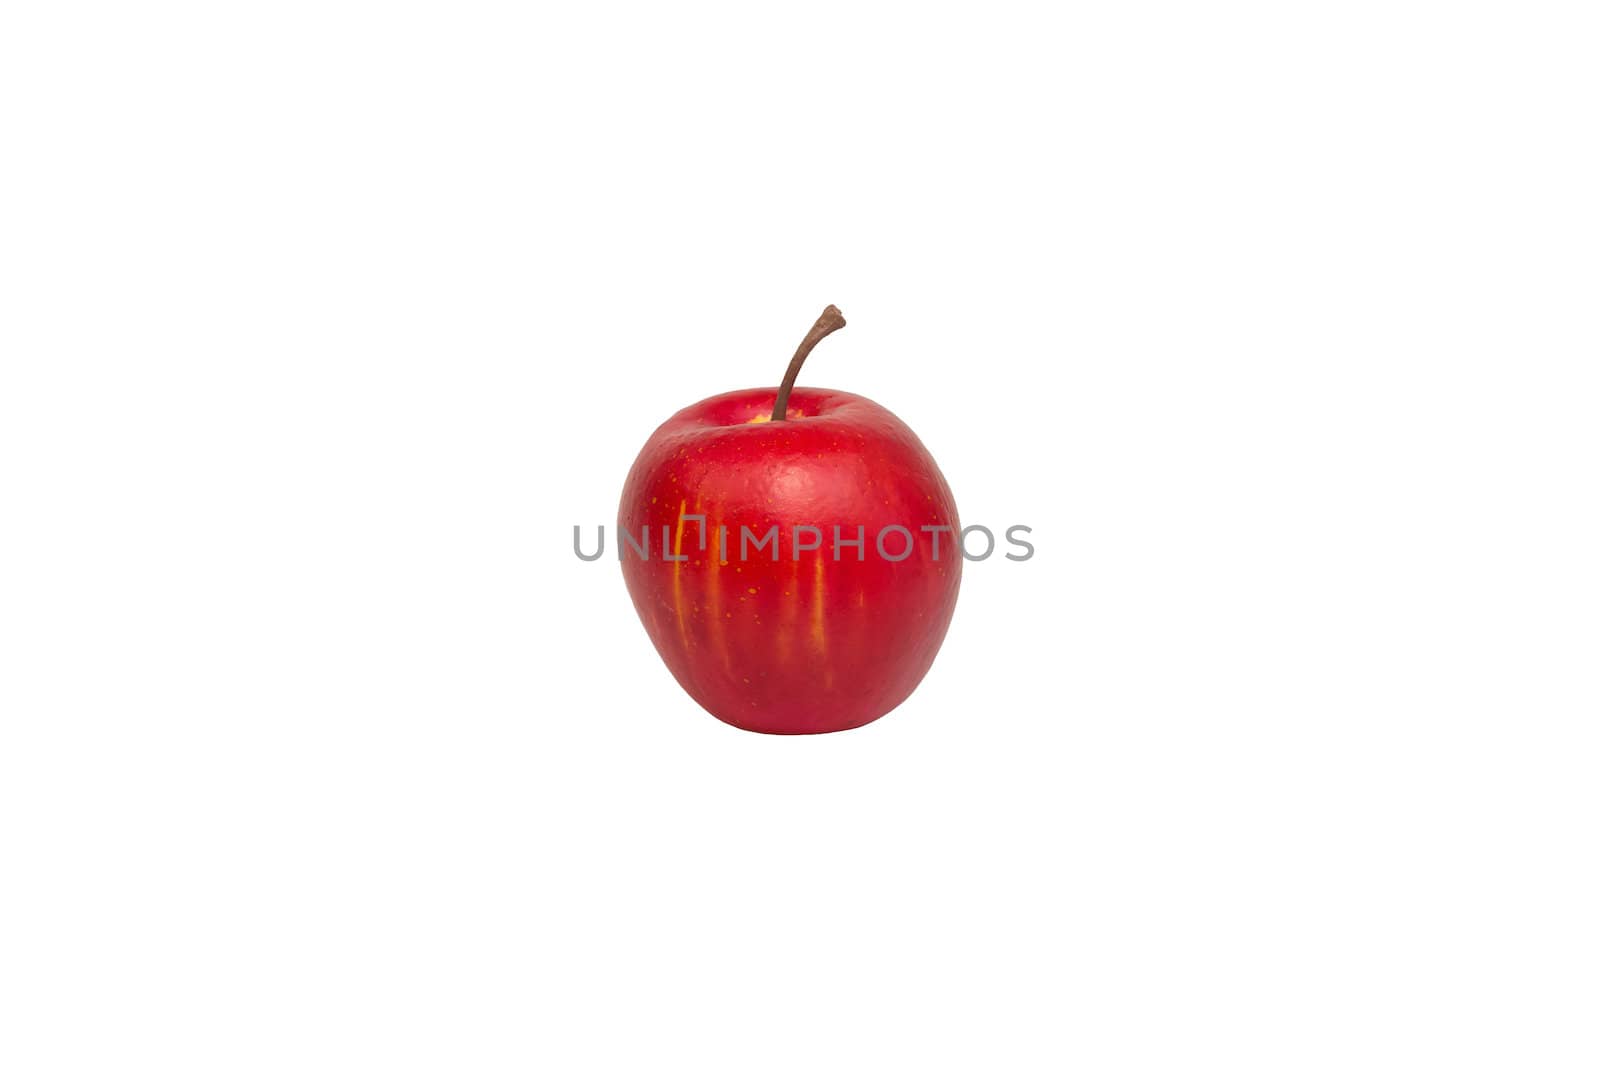 A single red apple is isolated on a white background.